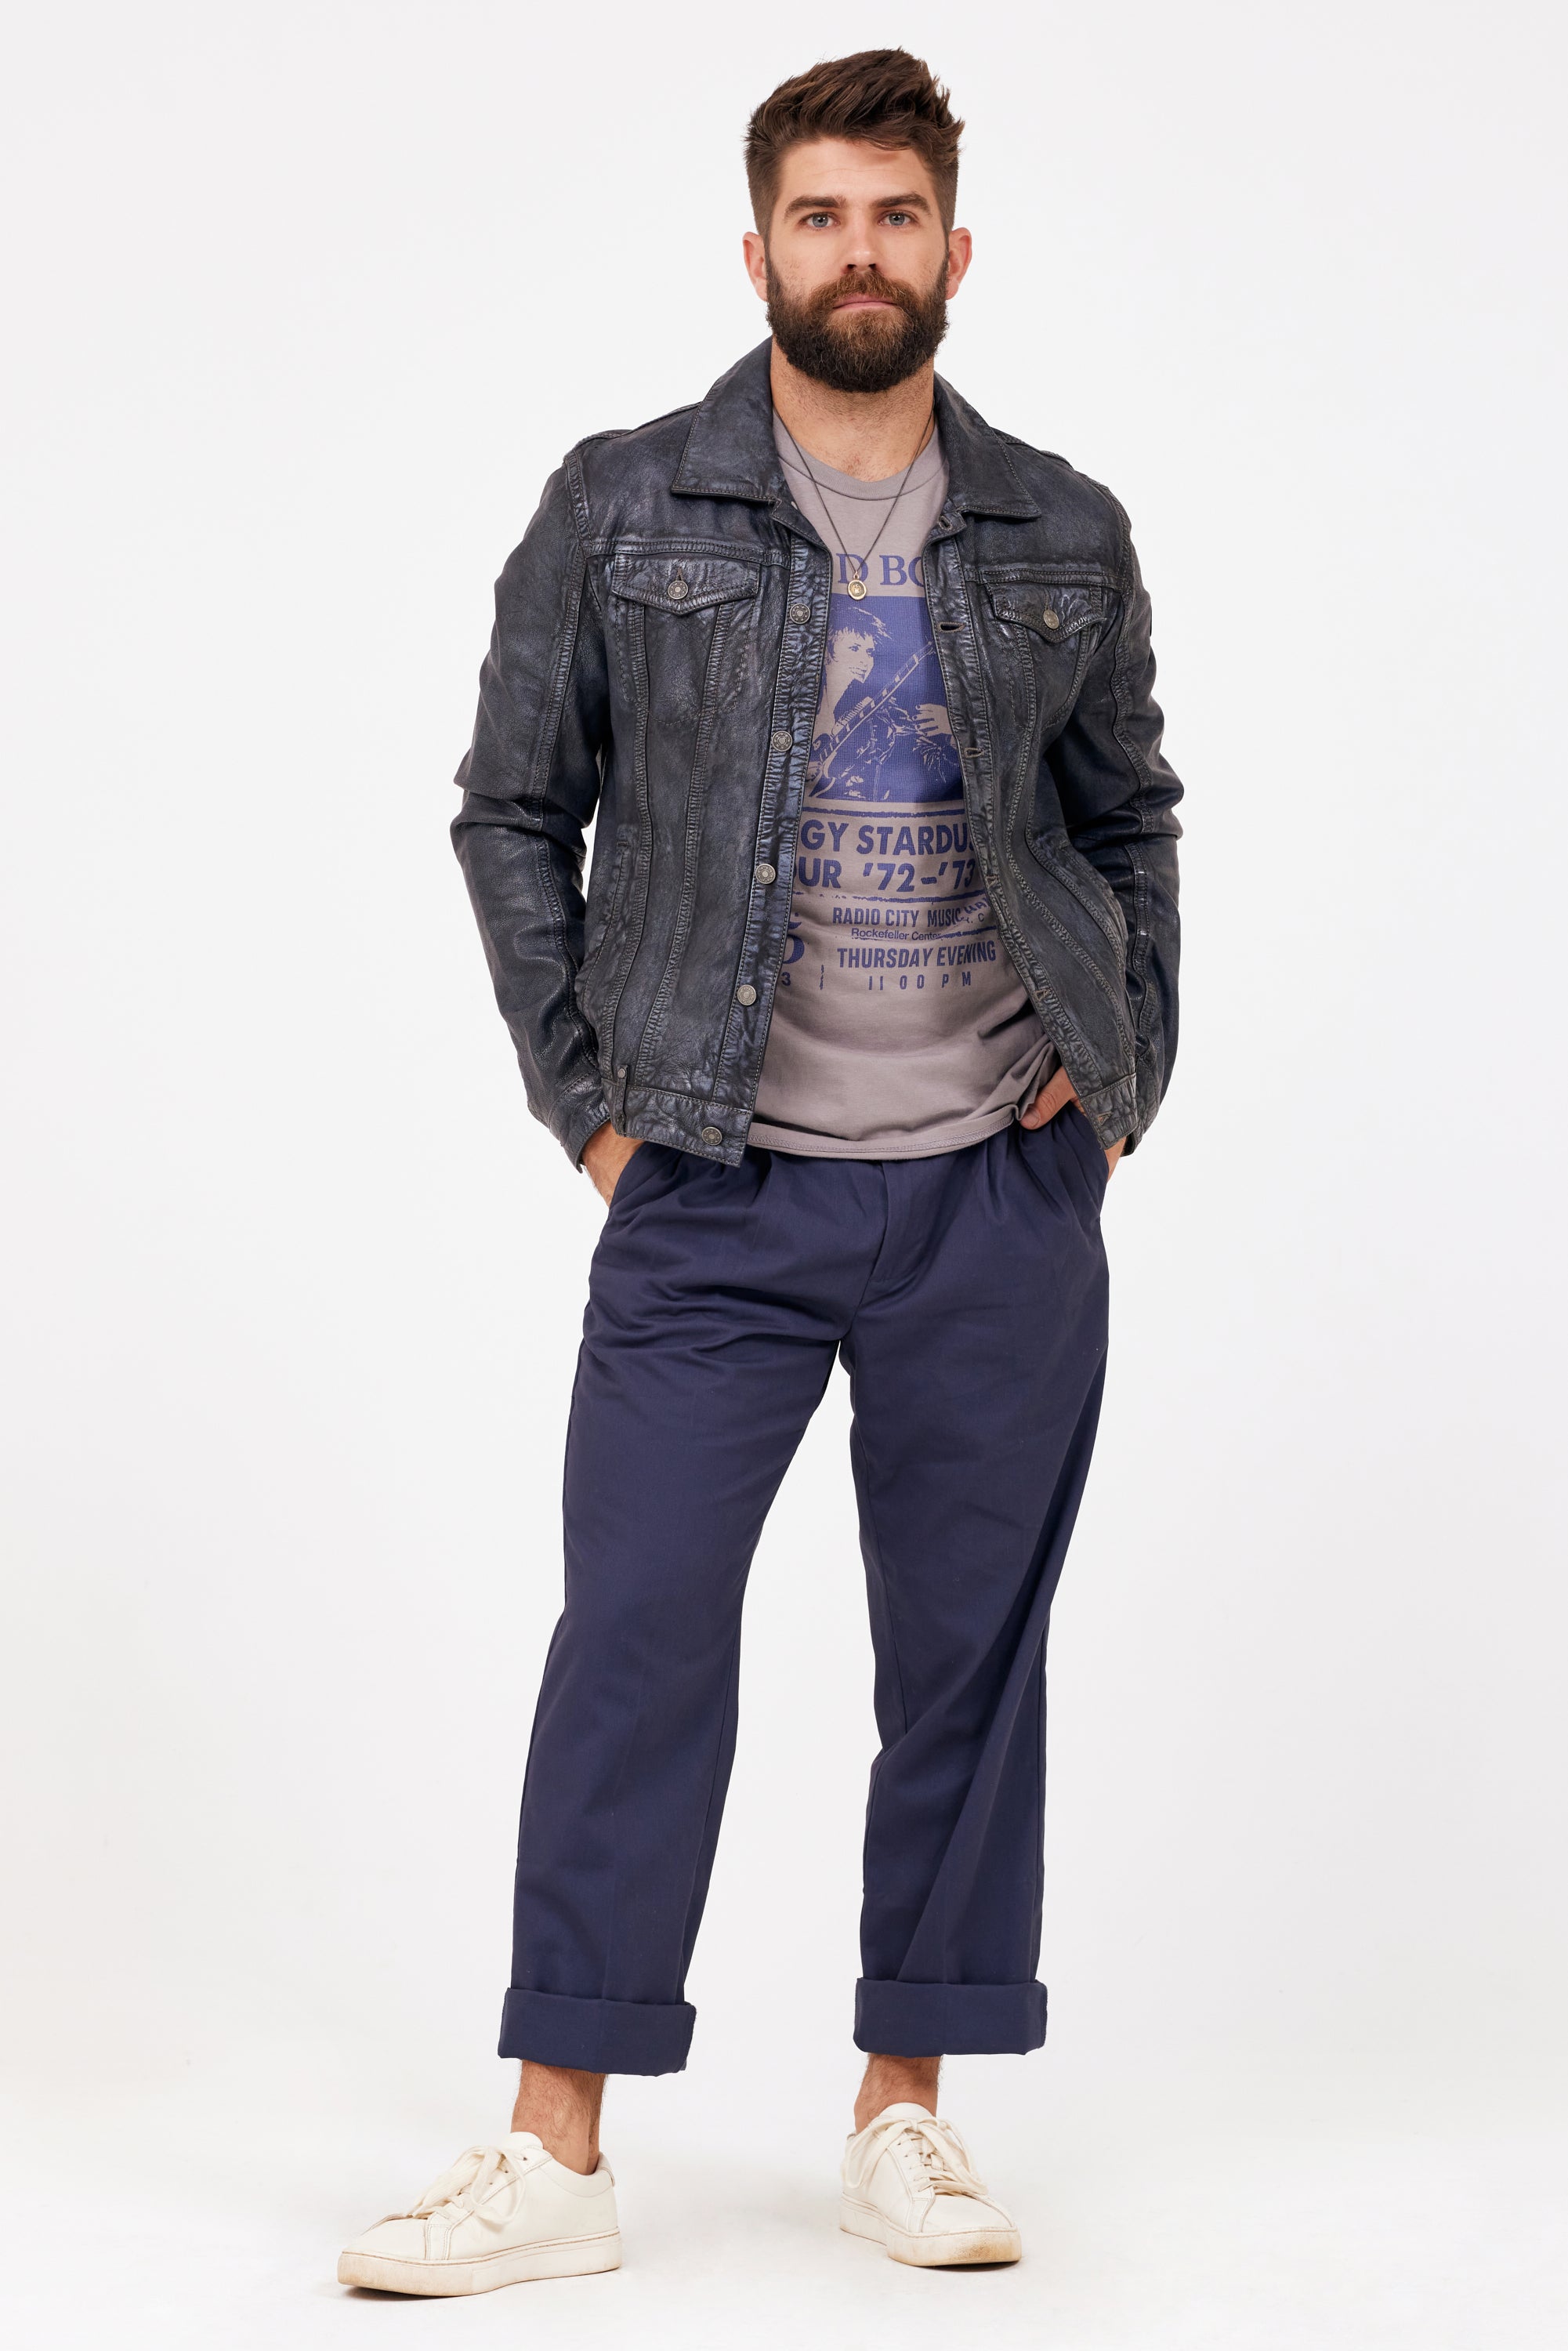 Geoff RF Anthracite-Blue Leather mauritiusleather – Jacket